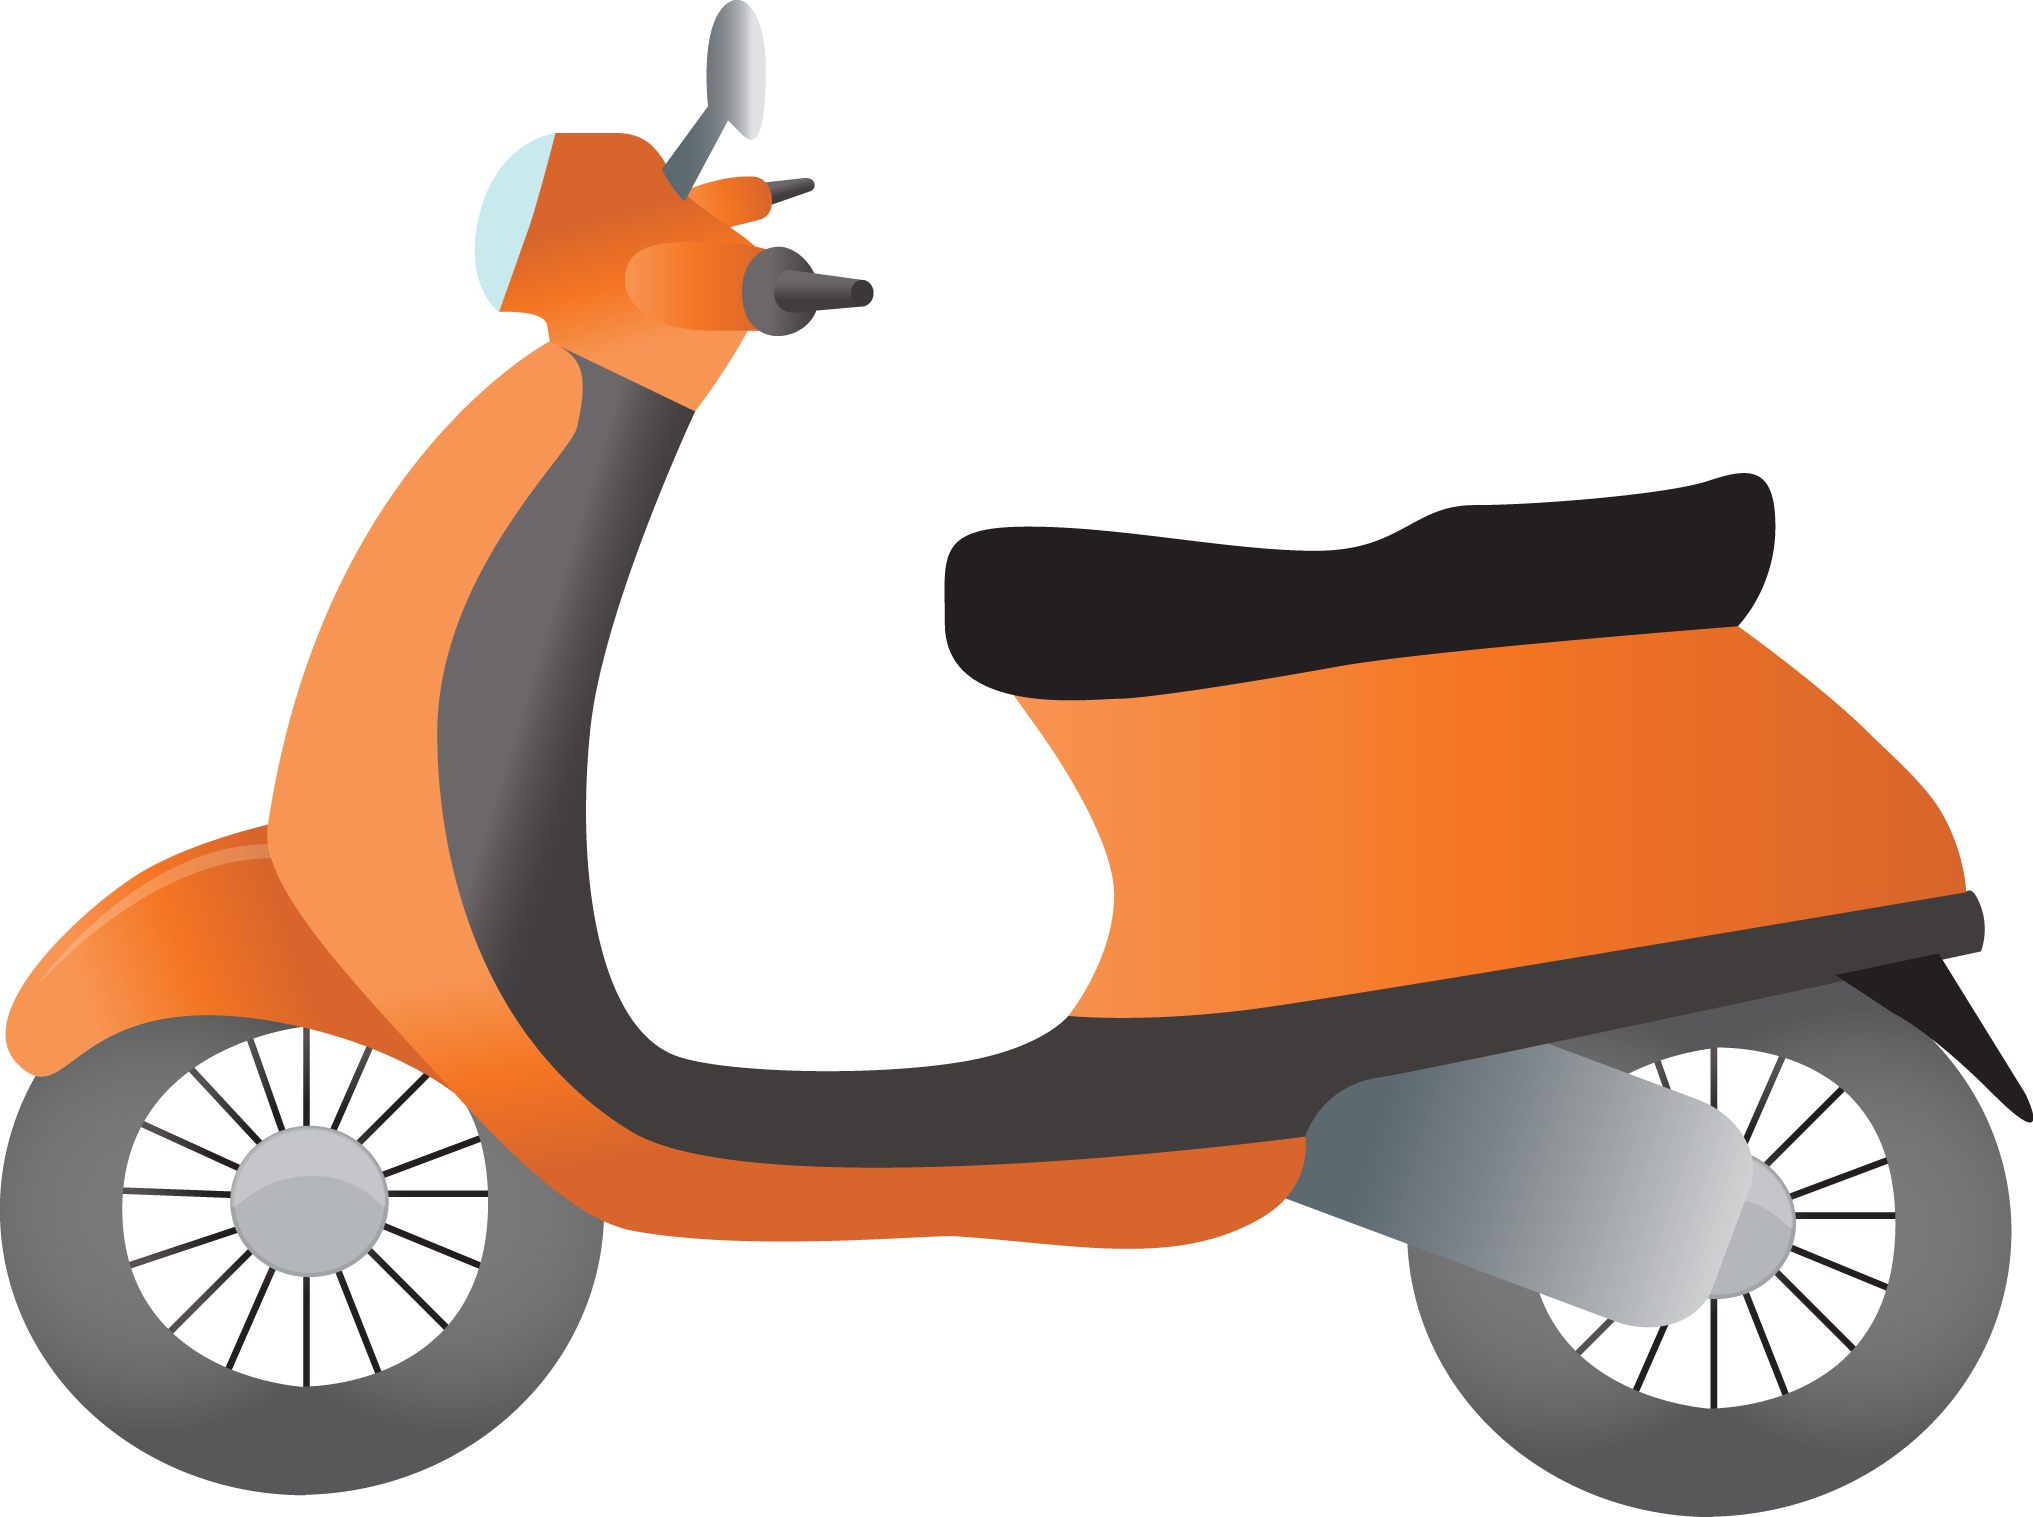 Png image purepng free. Cycle clipart bike scooter